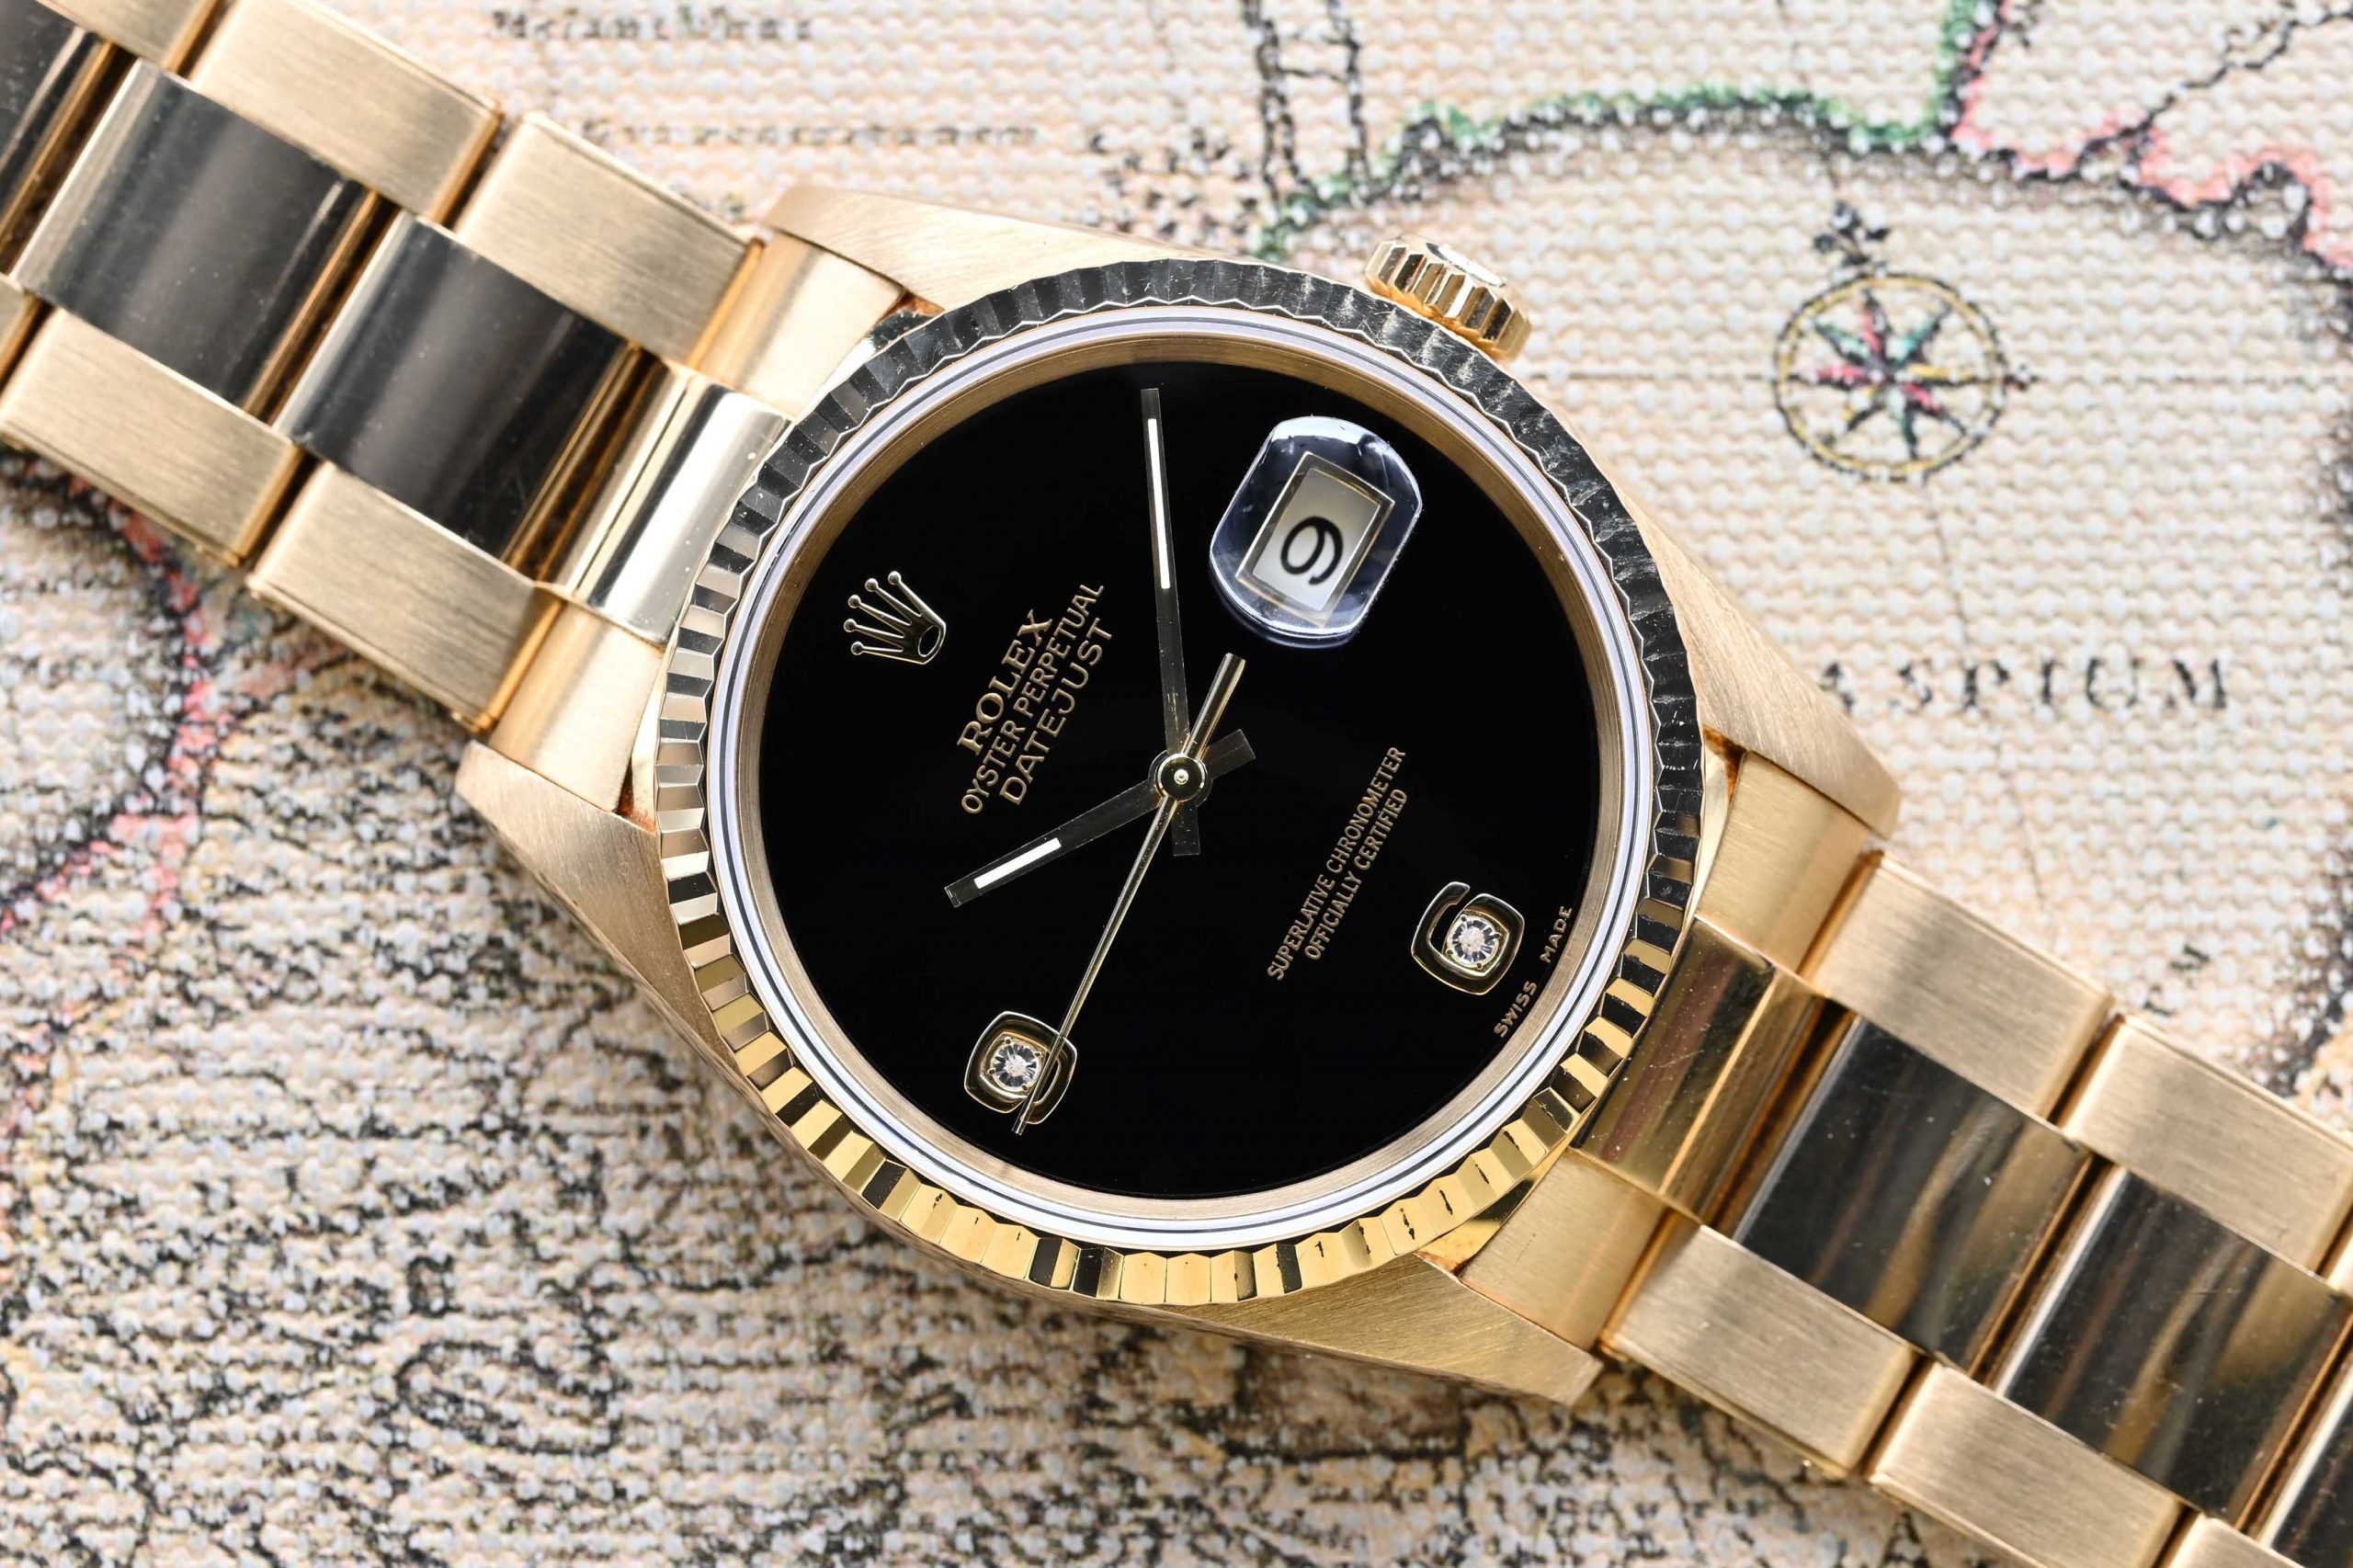 1995 Datejust Onyx Dial on Oyster 16238 Rolex Passion Market